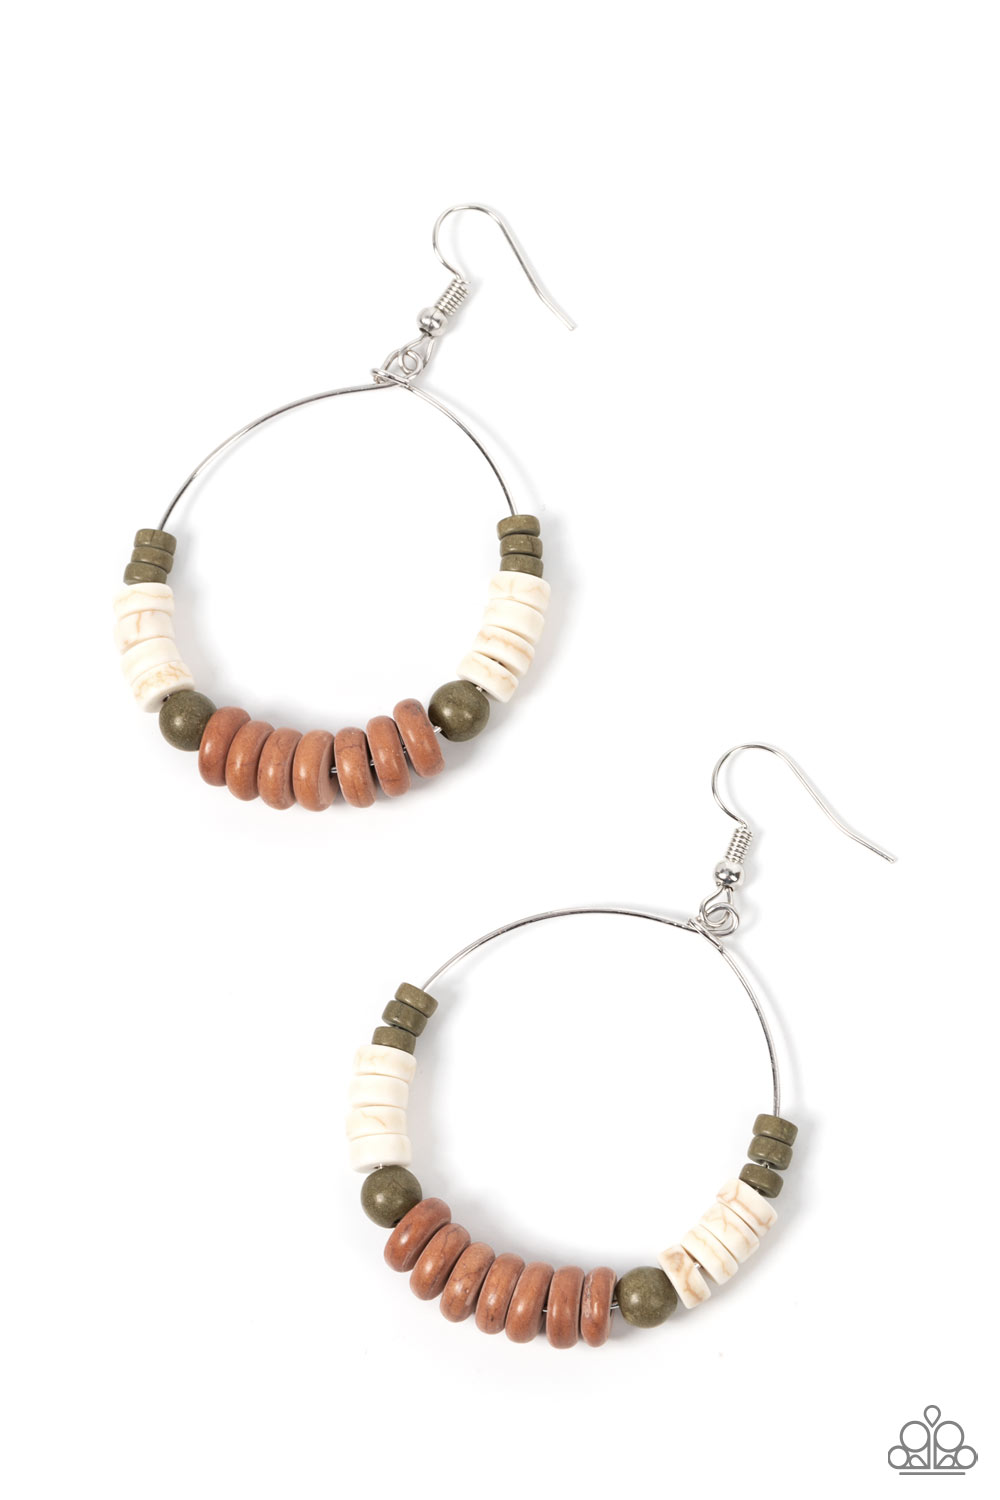 Earthy Esteem - Brown and Green Earrings - Paparazzi Accessories - Featuring round and disc shapes, an earthy assortment of white, brown, and green stones glides along a dainty wire hoop for an artisan inspired aesthetic. Earring attaches to a standard fishhook fitting. Sold as one pair of earrings.